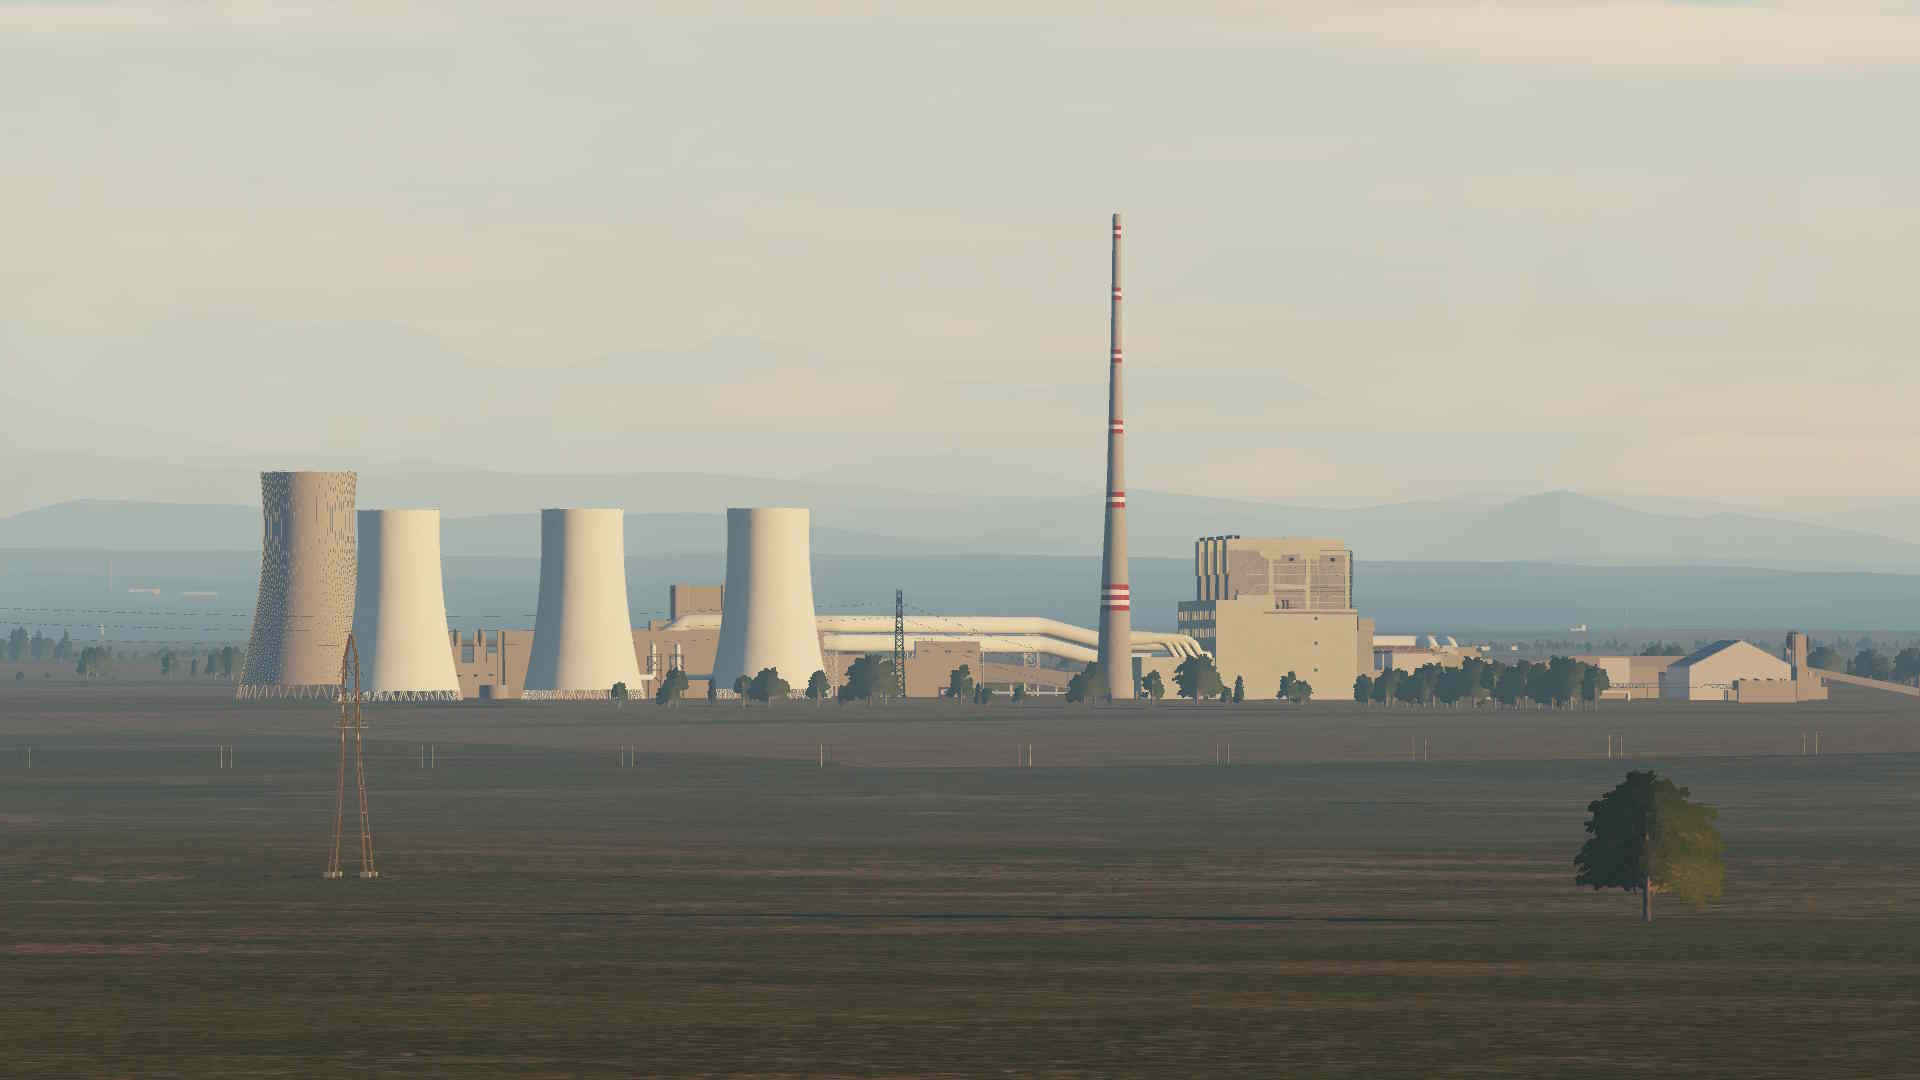 Large national thermal power plant